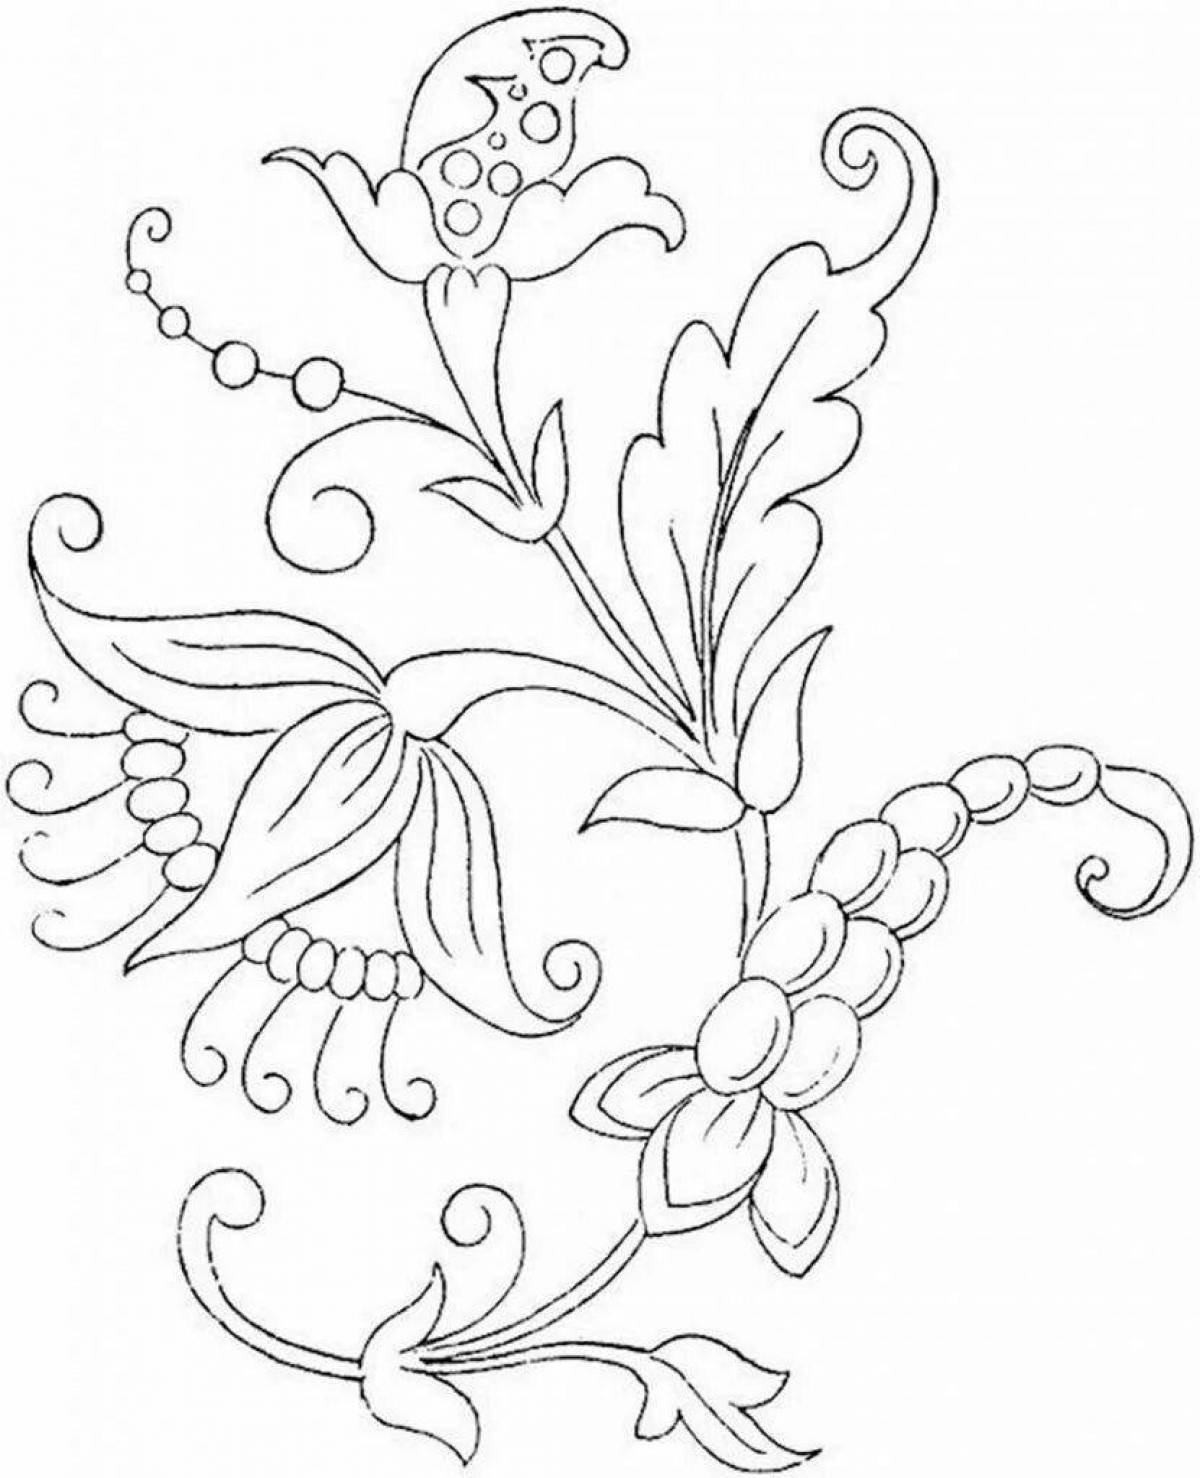 Great coloring book with floral patterns